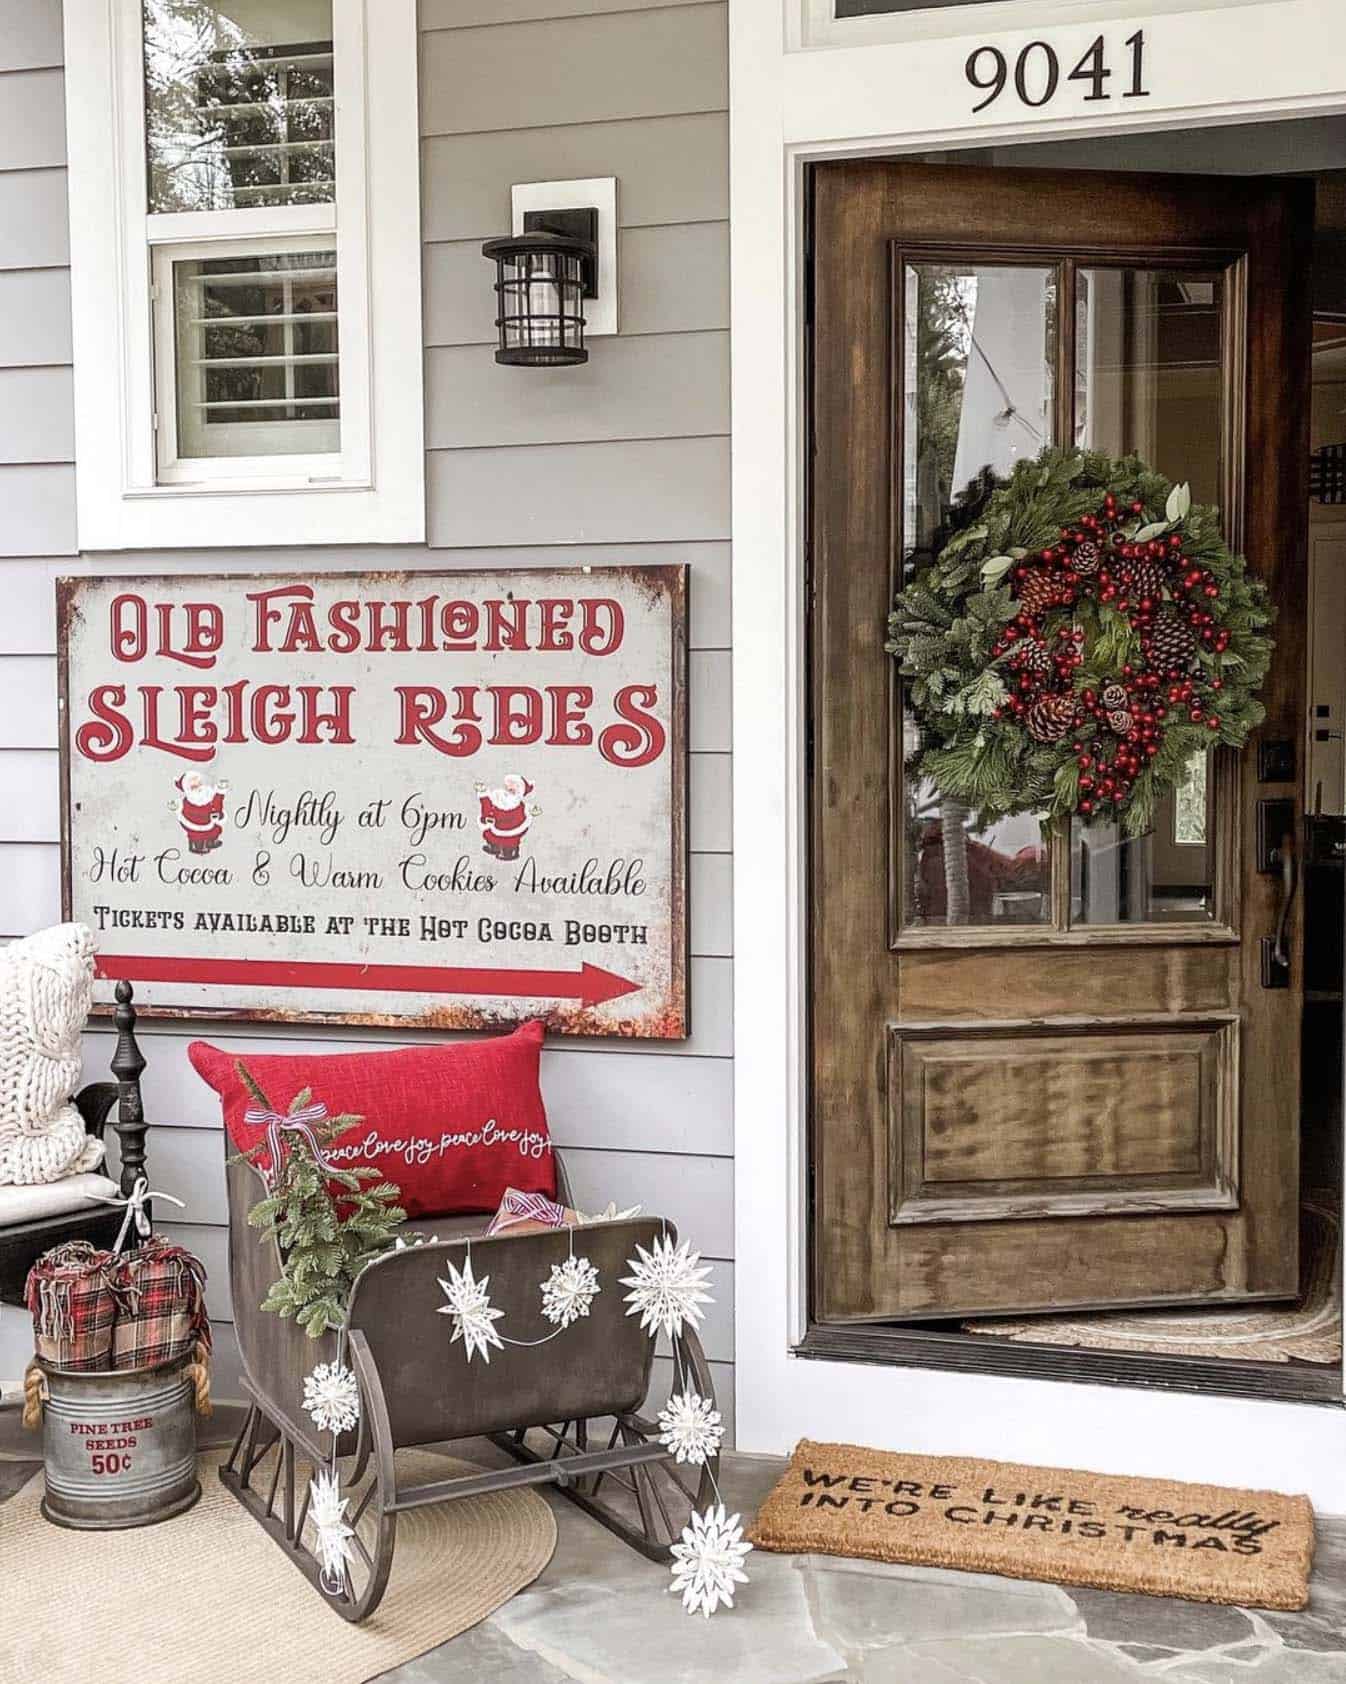 vintage style Christmas decor on the front porch with a sleigh, sign and wreath